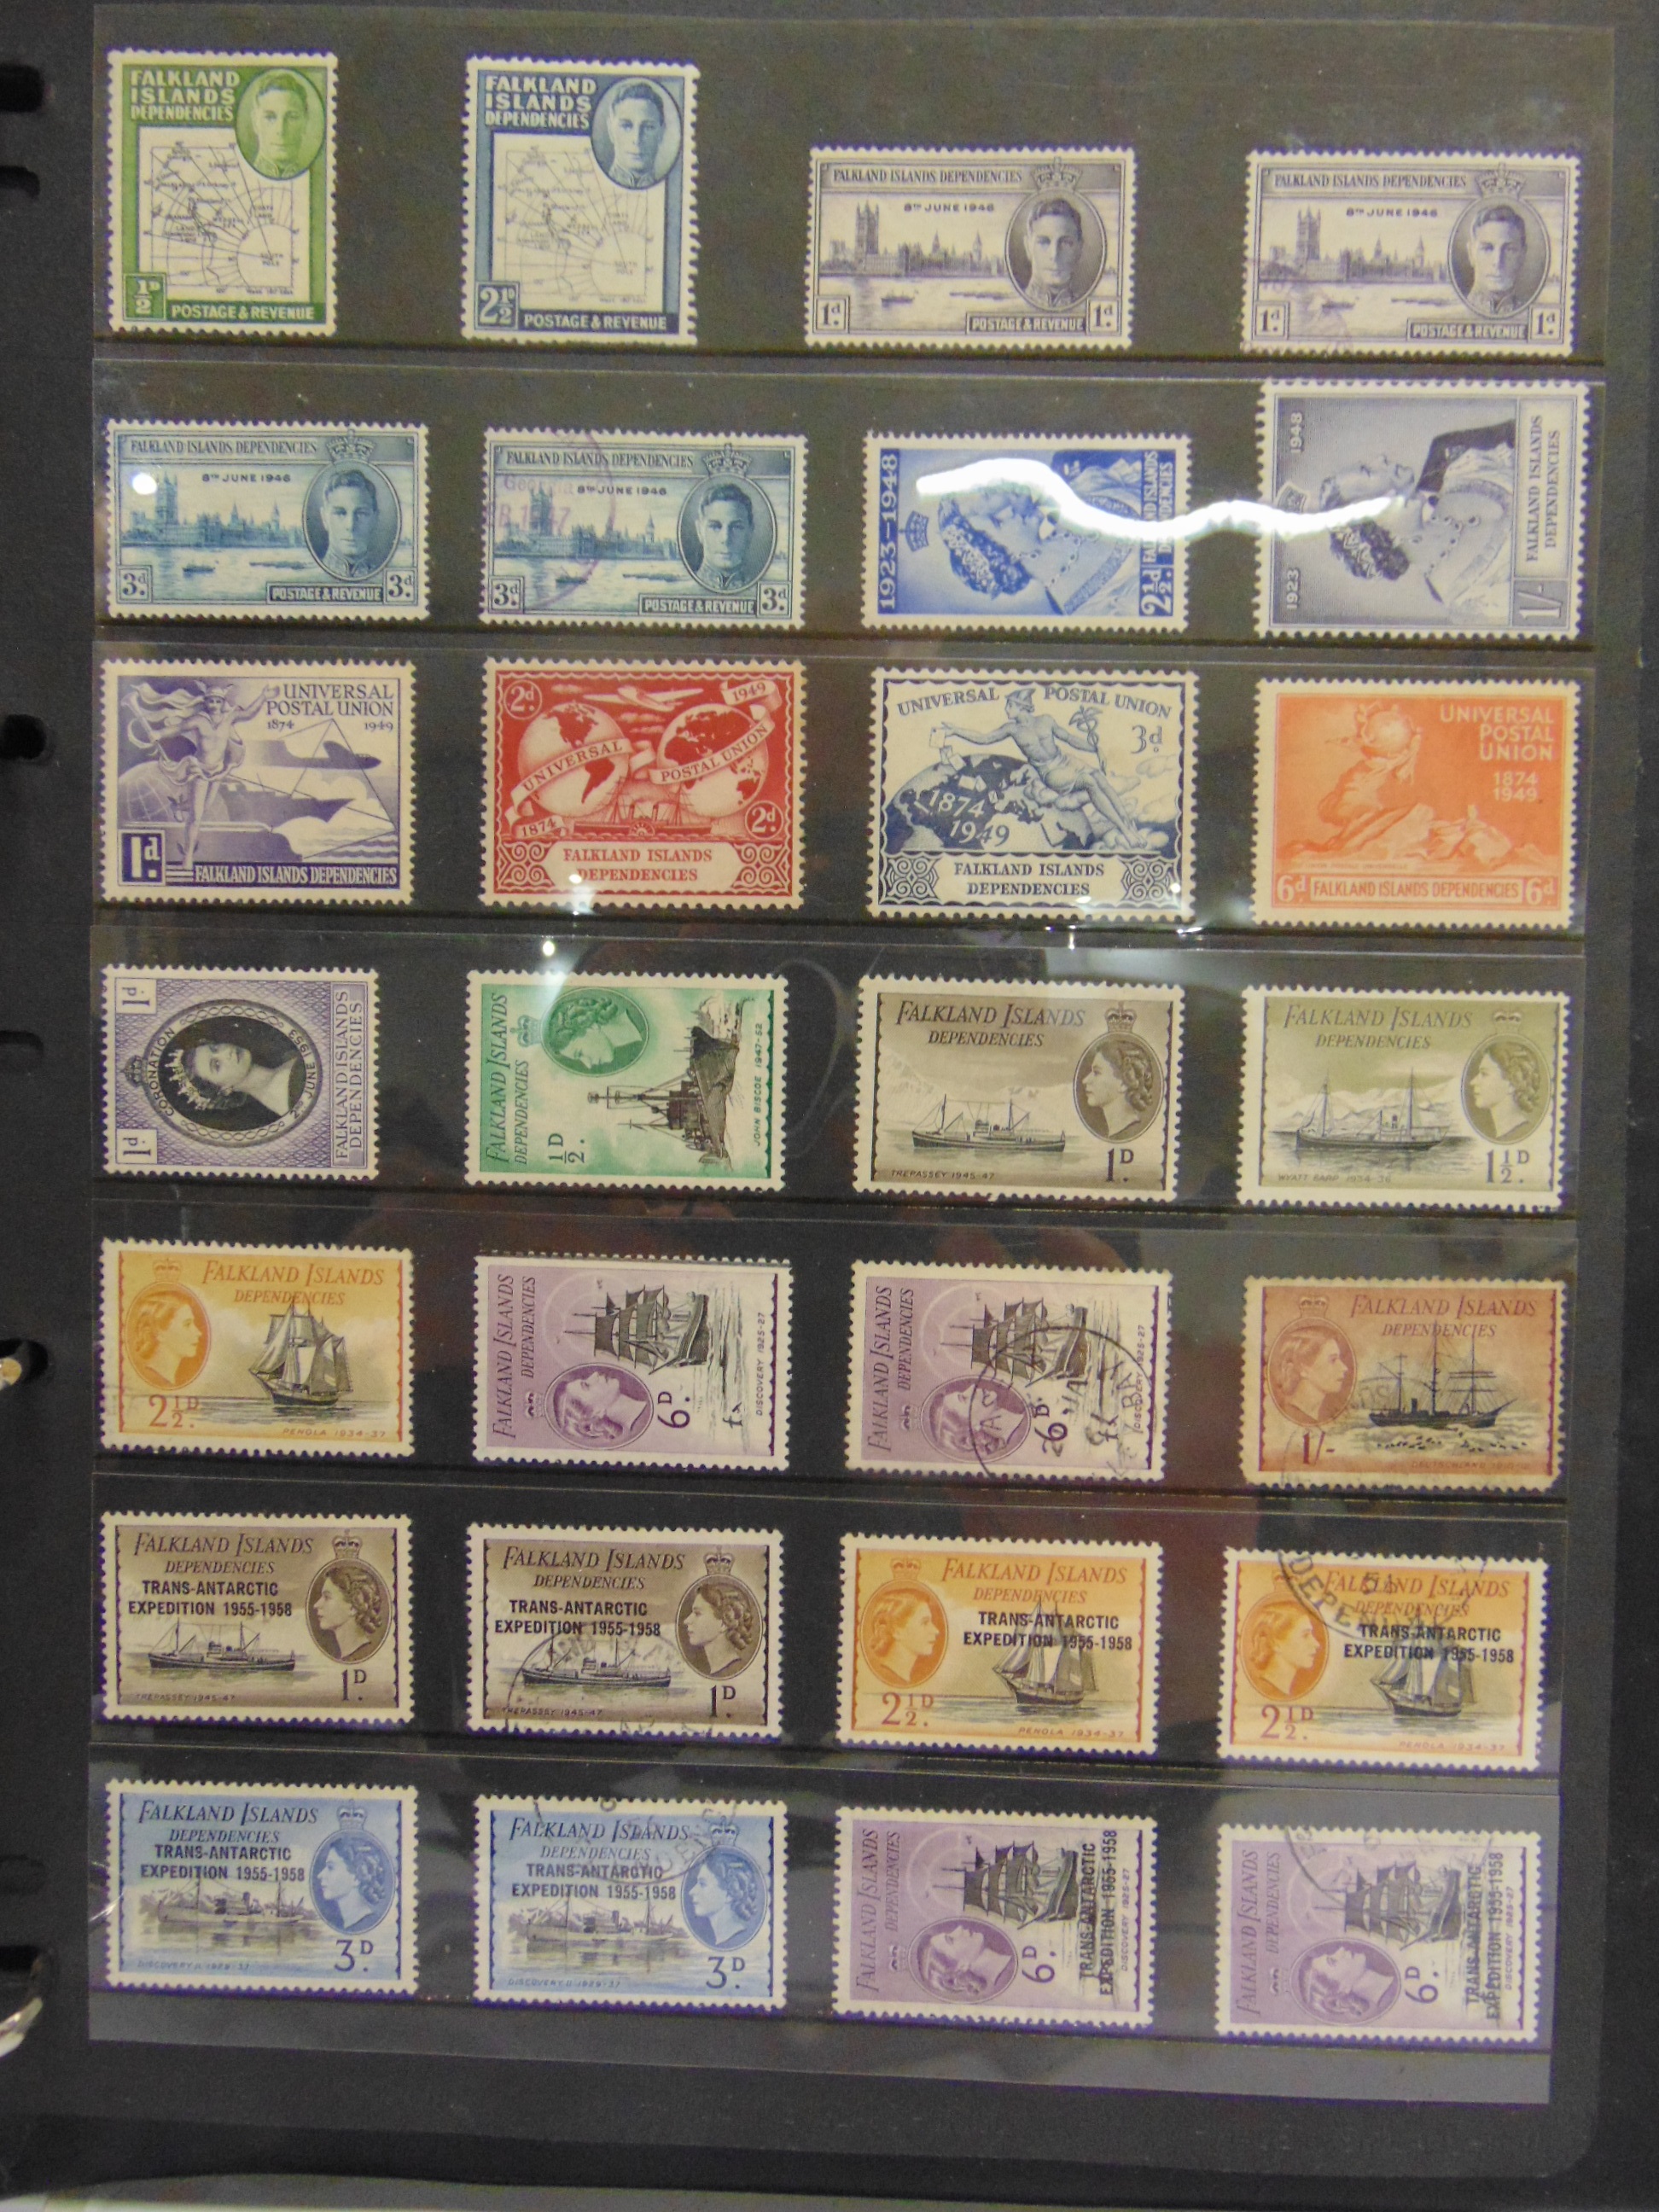 STAMPS - A PART-WORLD COLLECTION including the Falkland Islands, Fiji, The Gambia, Gold Coast / - Image 8 of 12